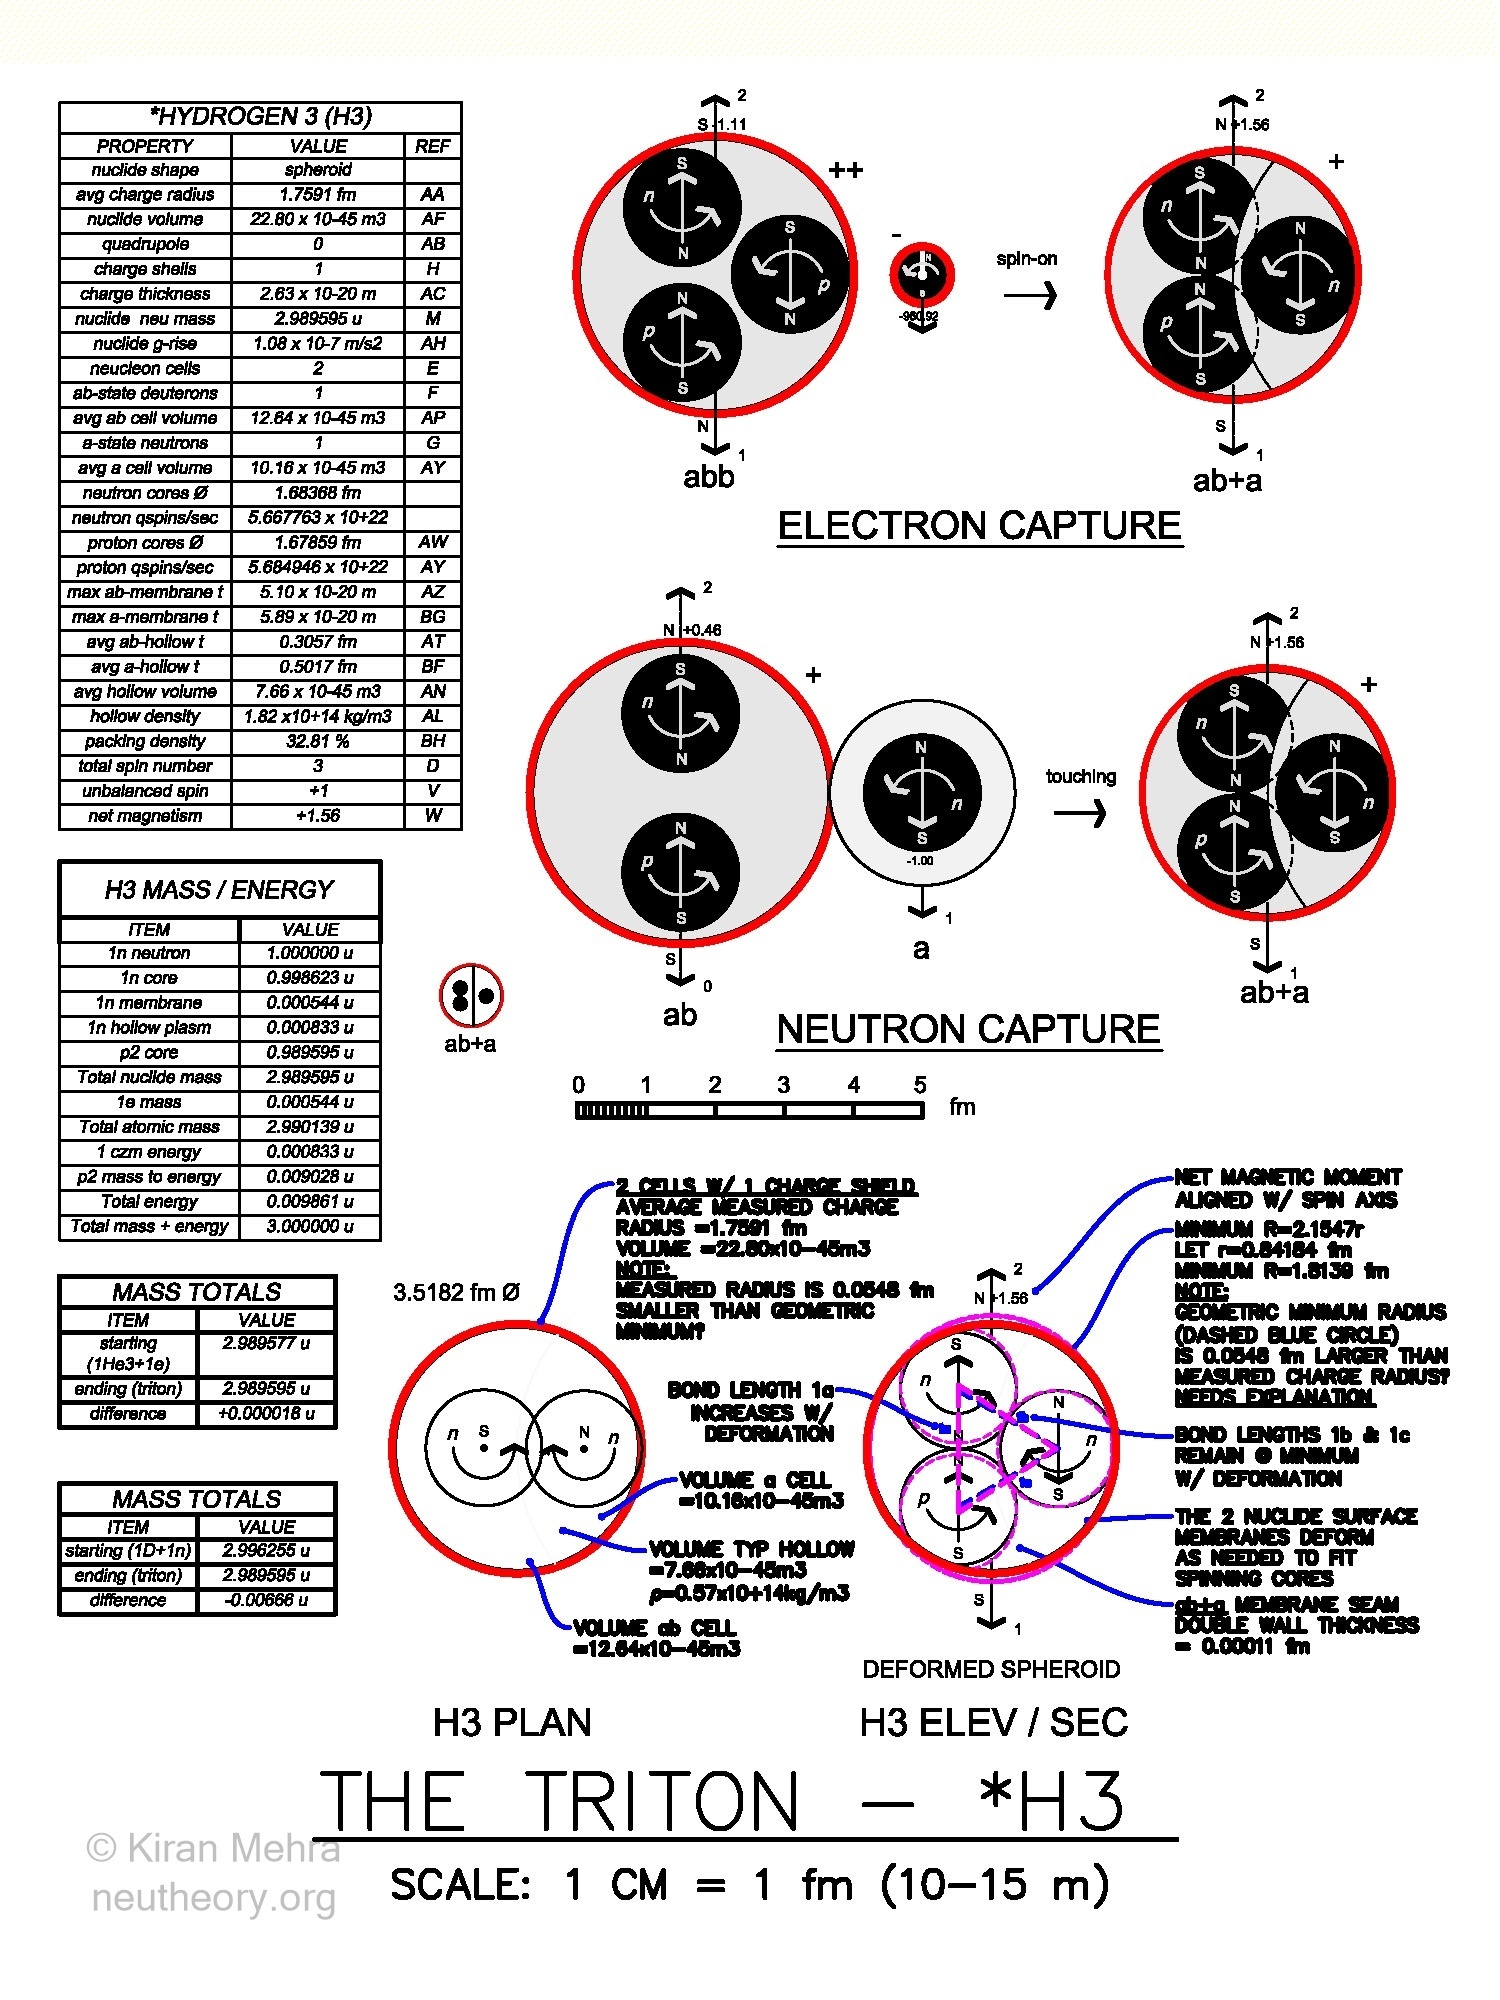 red circles with black balls and text showing two methods by which the hydrogen-3 nuclide is synthesized